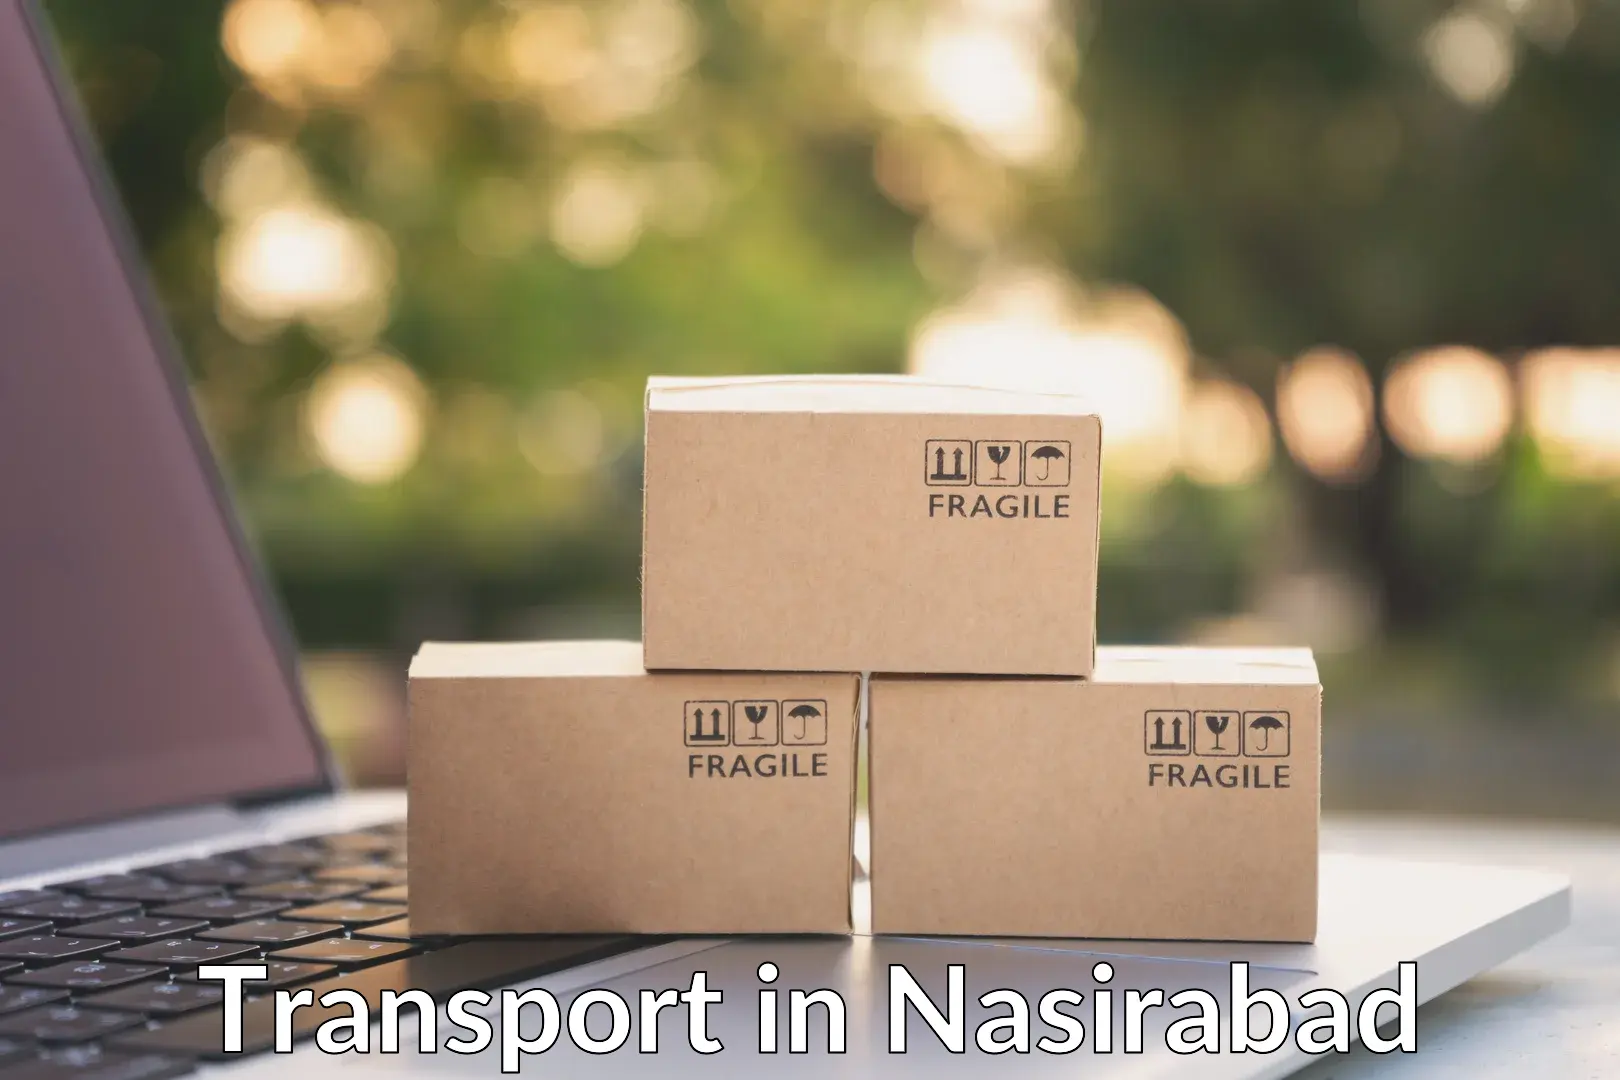 Express transport services in Nasirabad